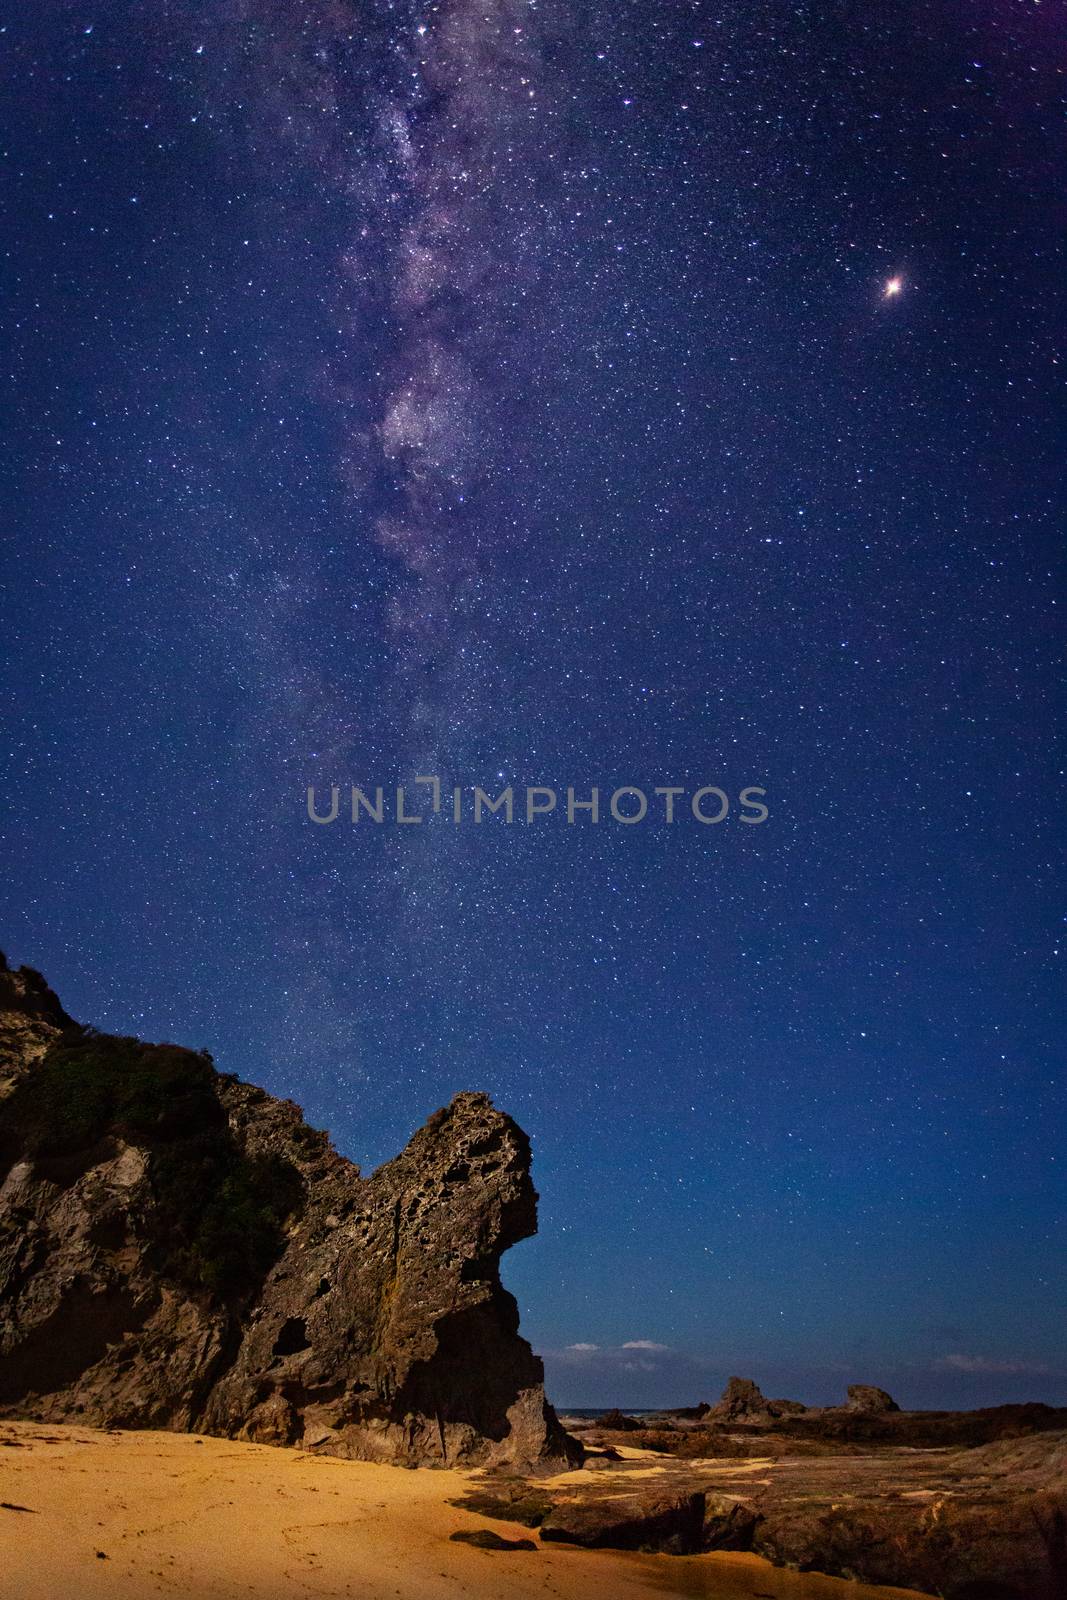 Clear starry skies and the Milky Way universe shines brightly  over Queen Victoria Rock on far south coast of NSW.